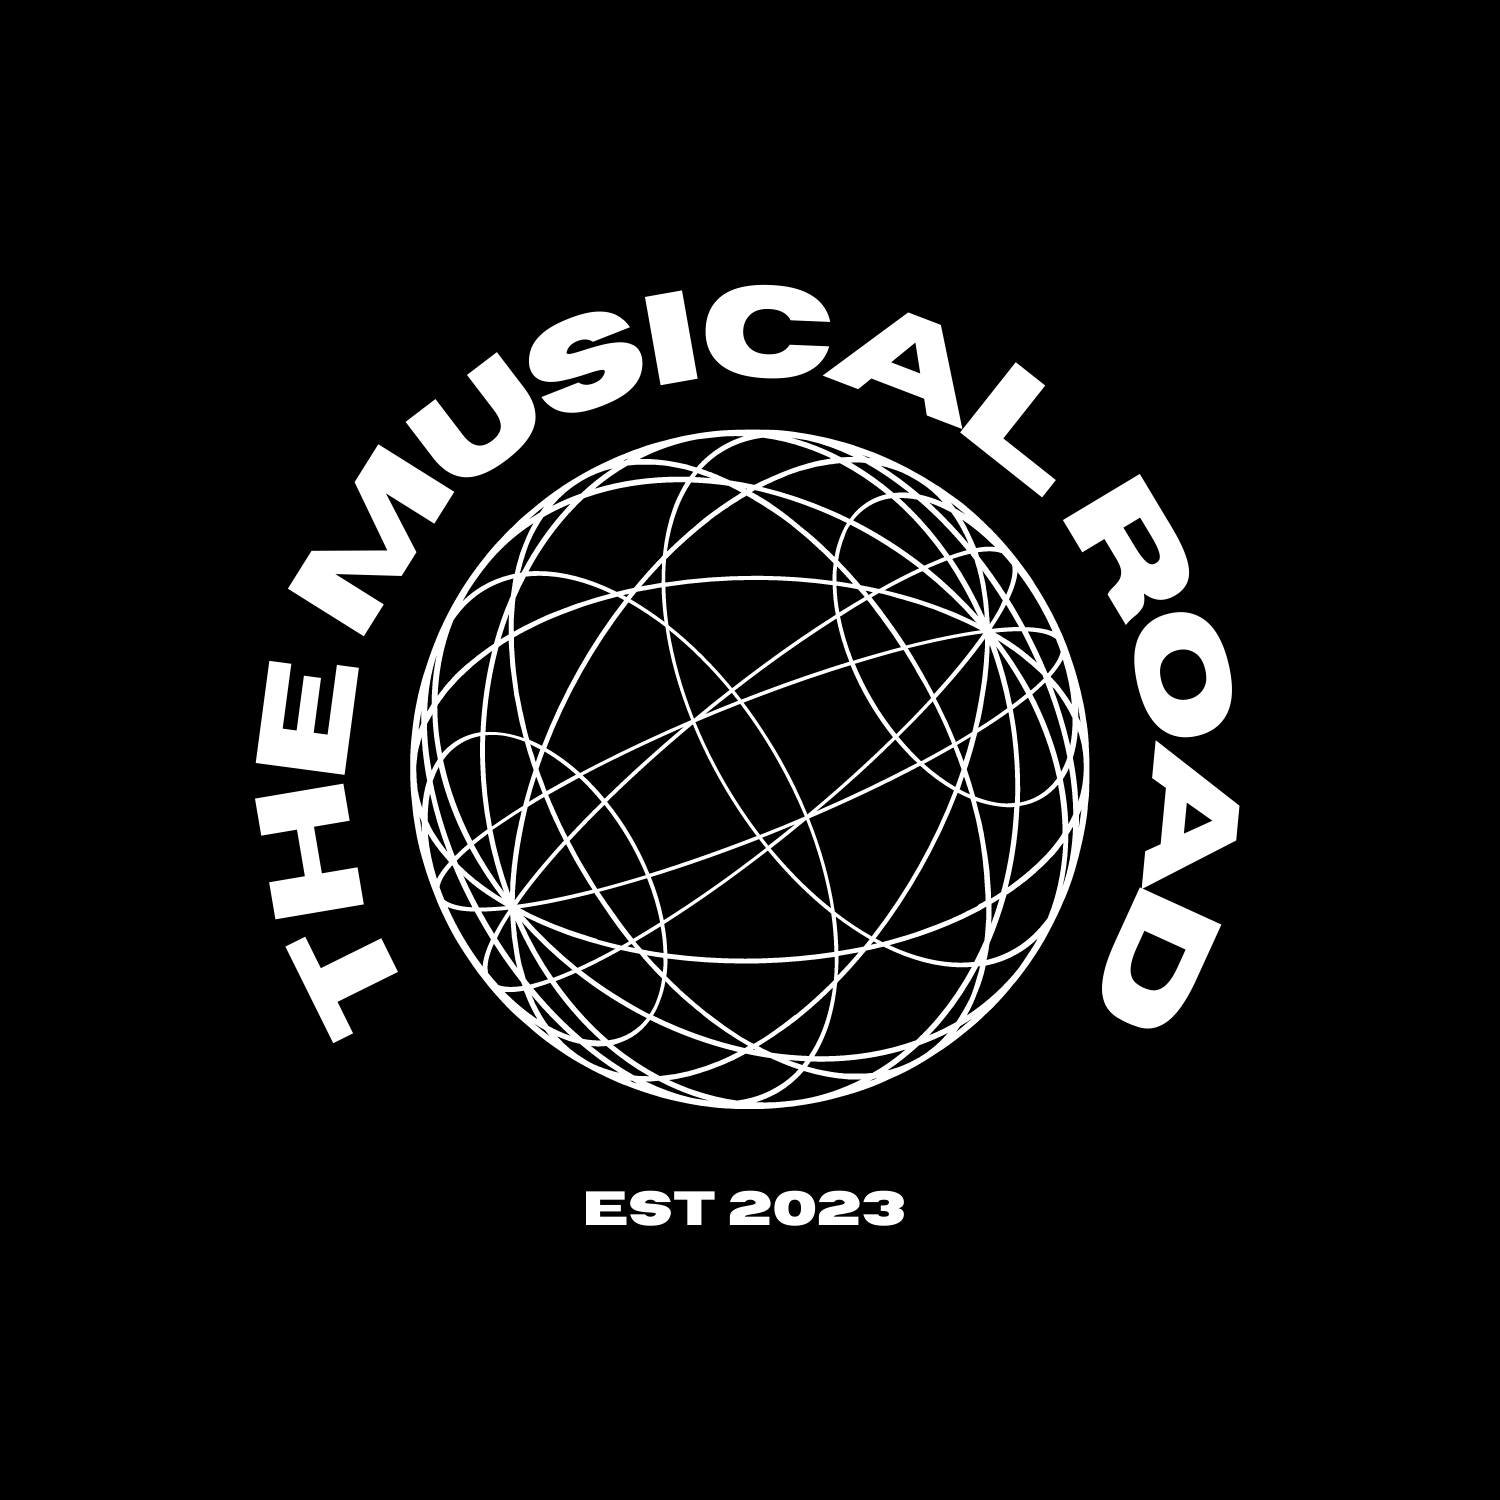 The Musical Road